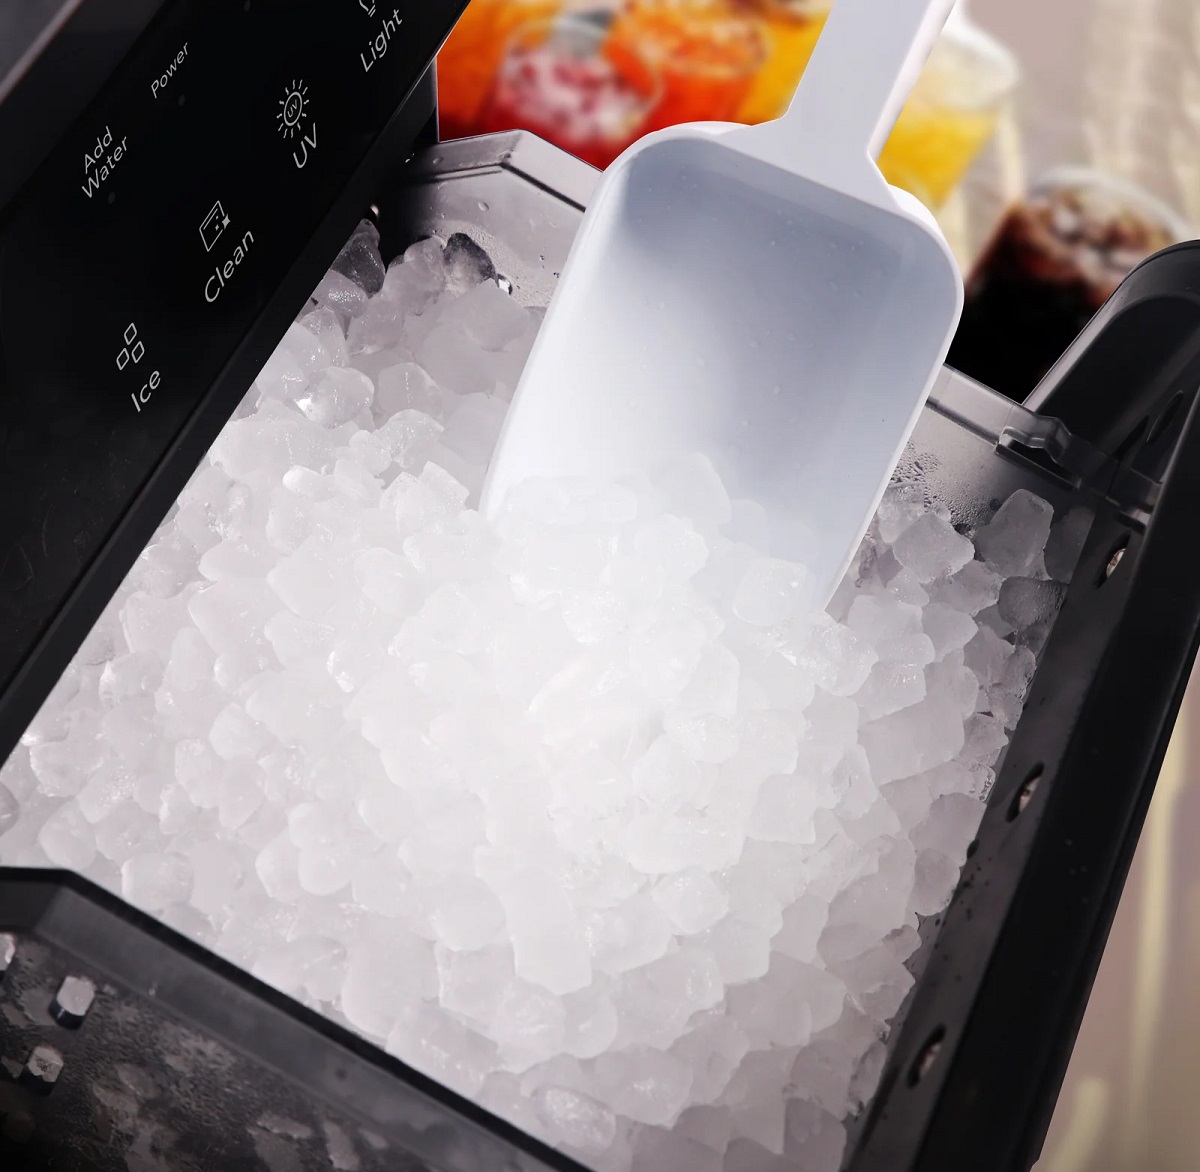 How To Work A Frigidaire Ice Maker